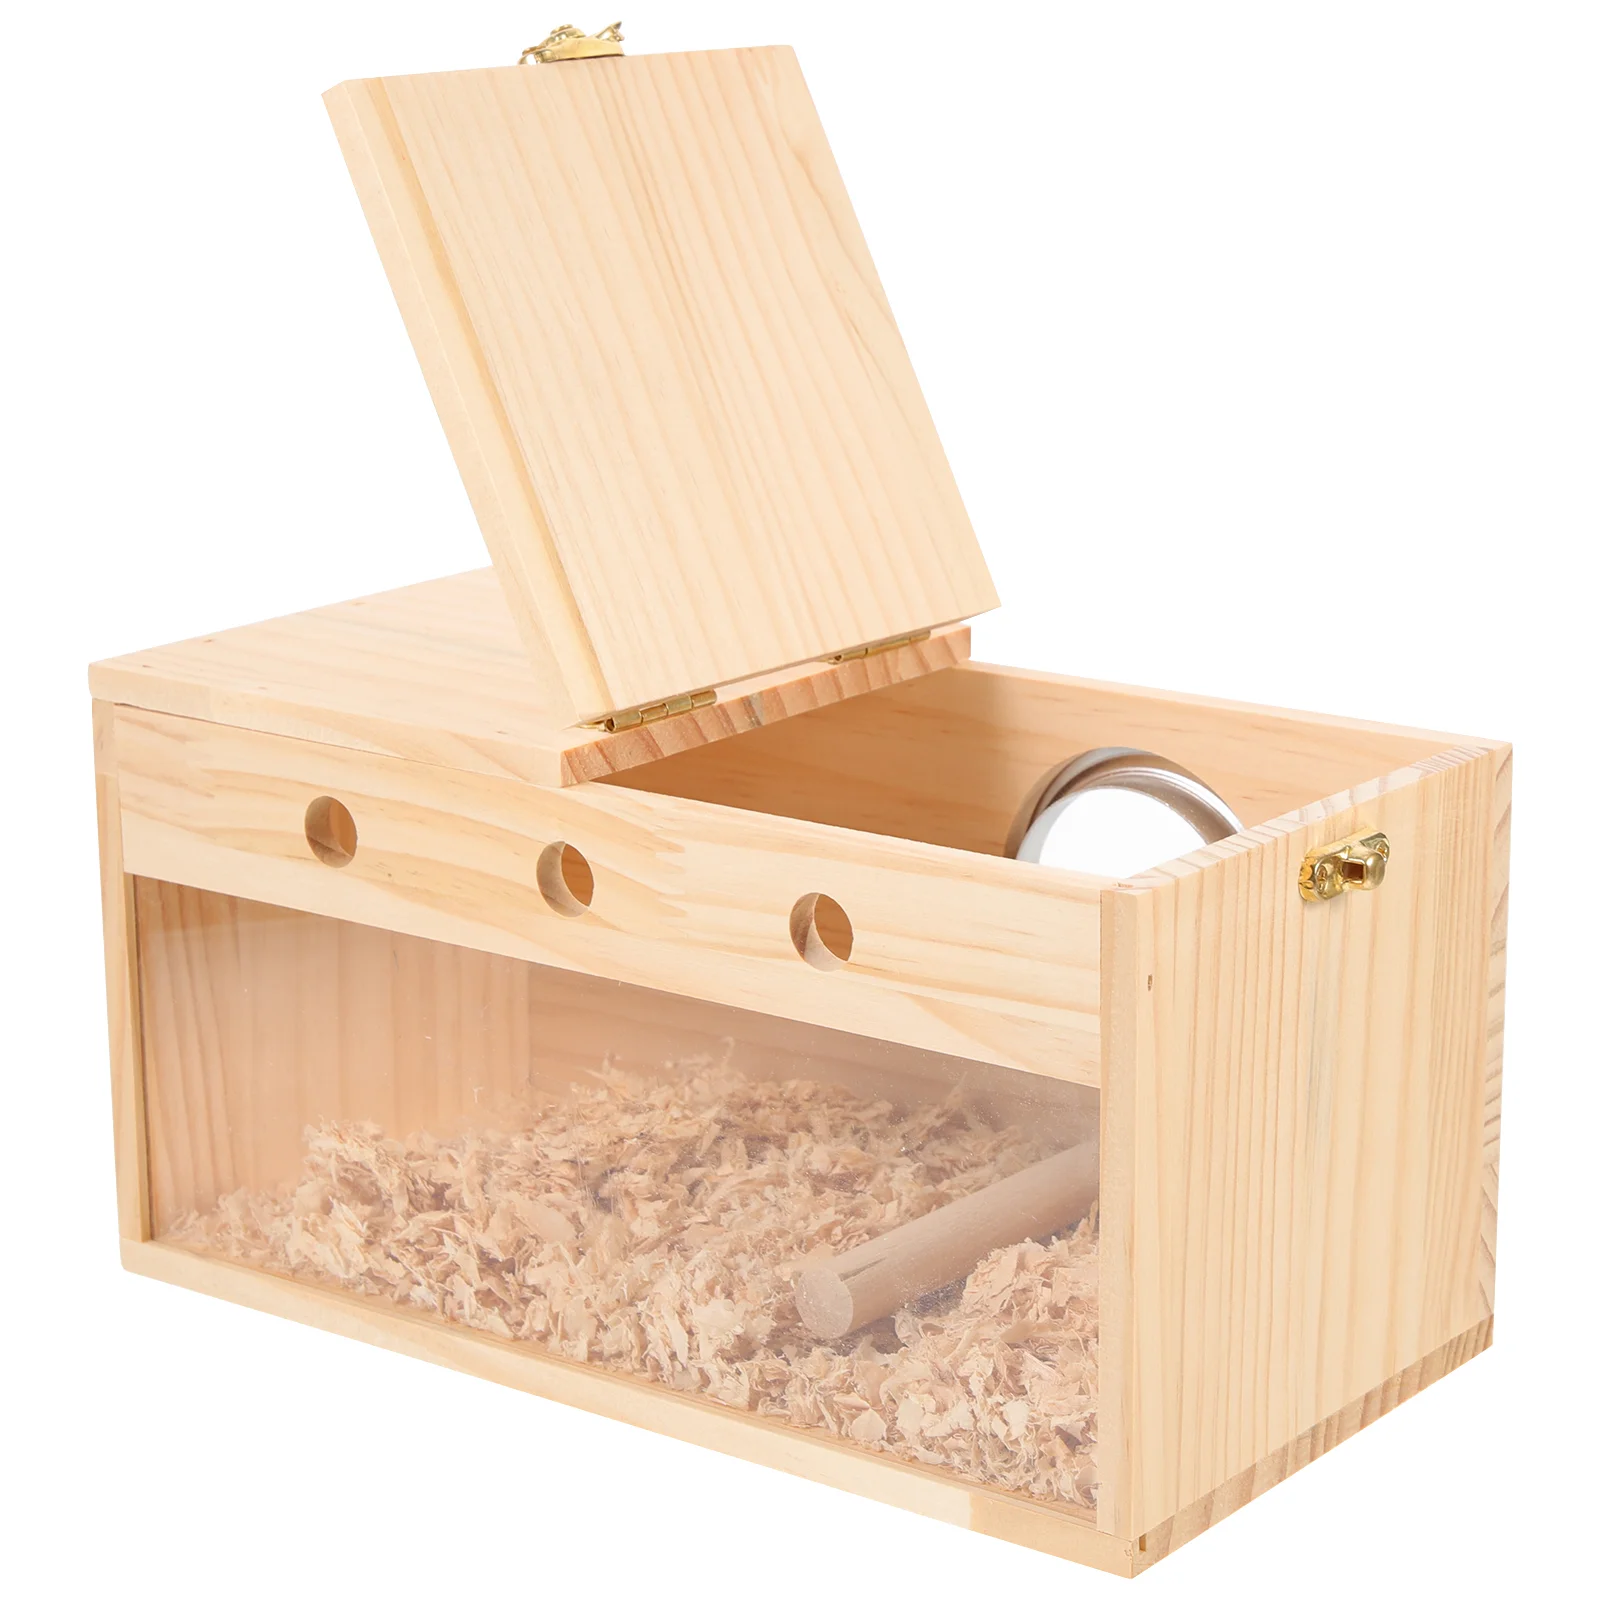 

Bird Box Nesting Parakeet Nest Cage House Breeding Cockatiel Parrot Wooden Toys Boxes Wood Houses Parakeets Cages Budgie